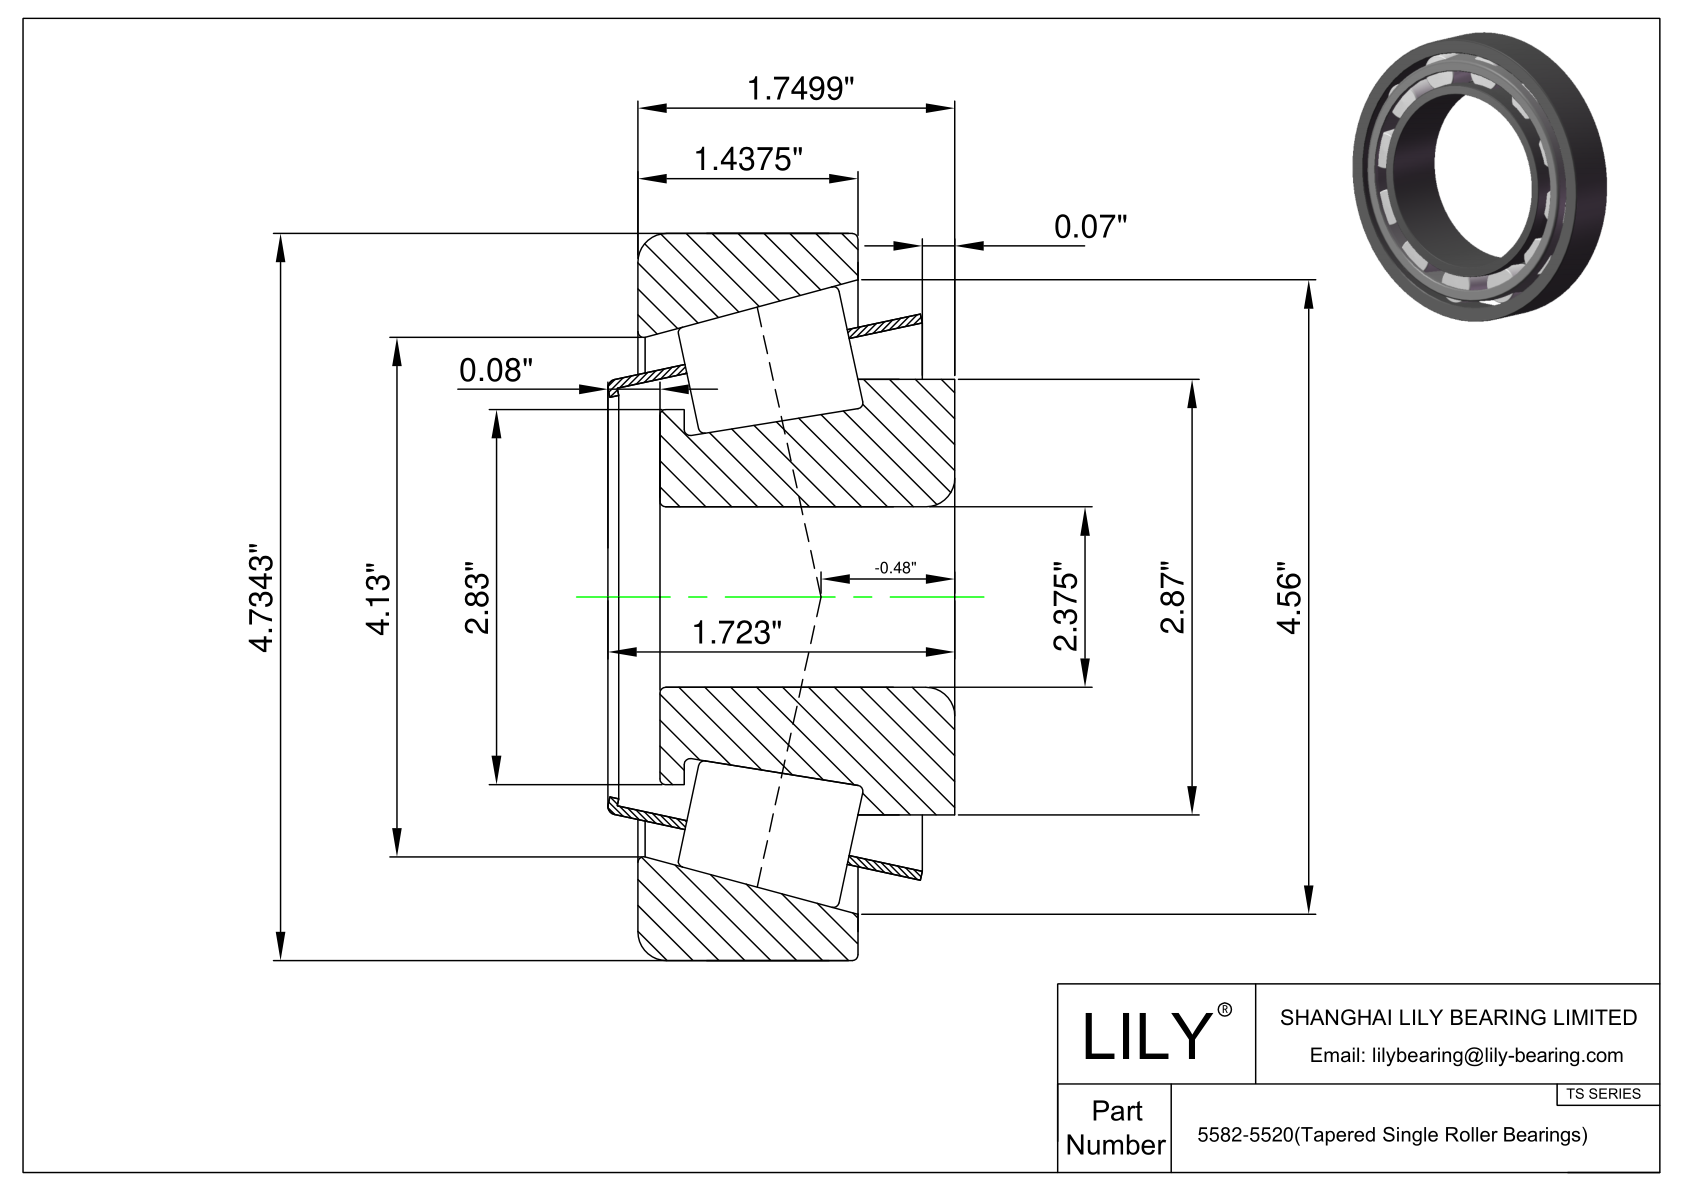 5582-5520 TS (Tapered Single Roller Bearings) (Imperial) cad drawing